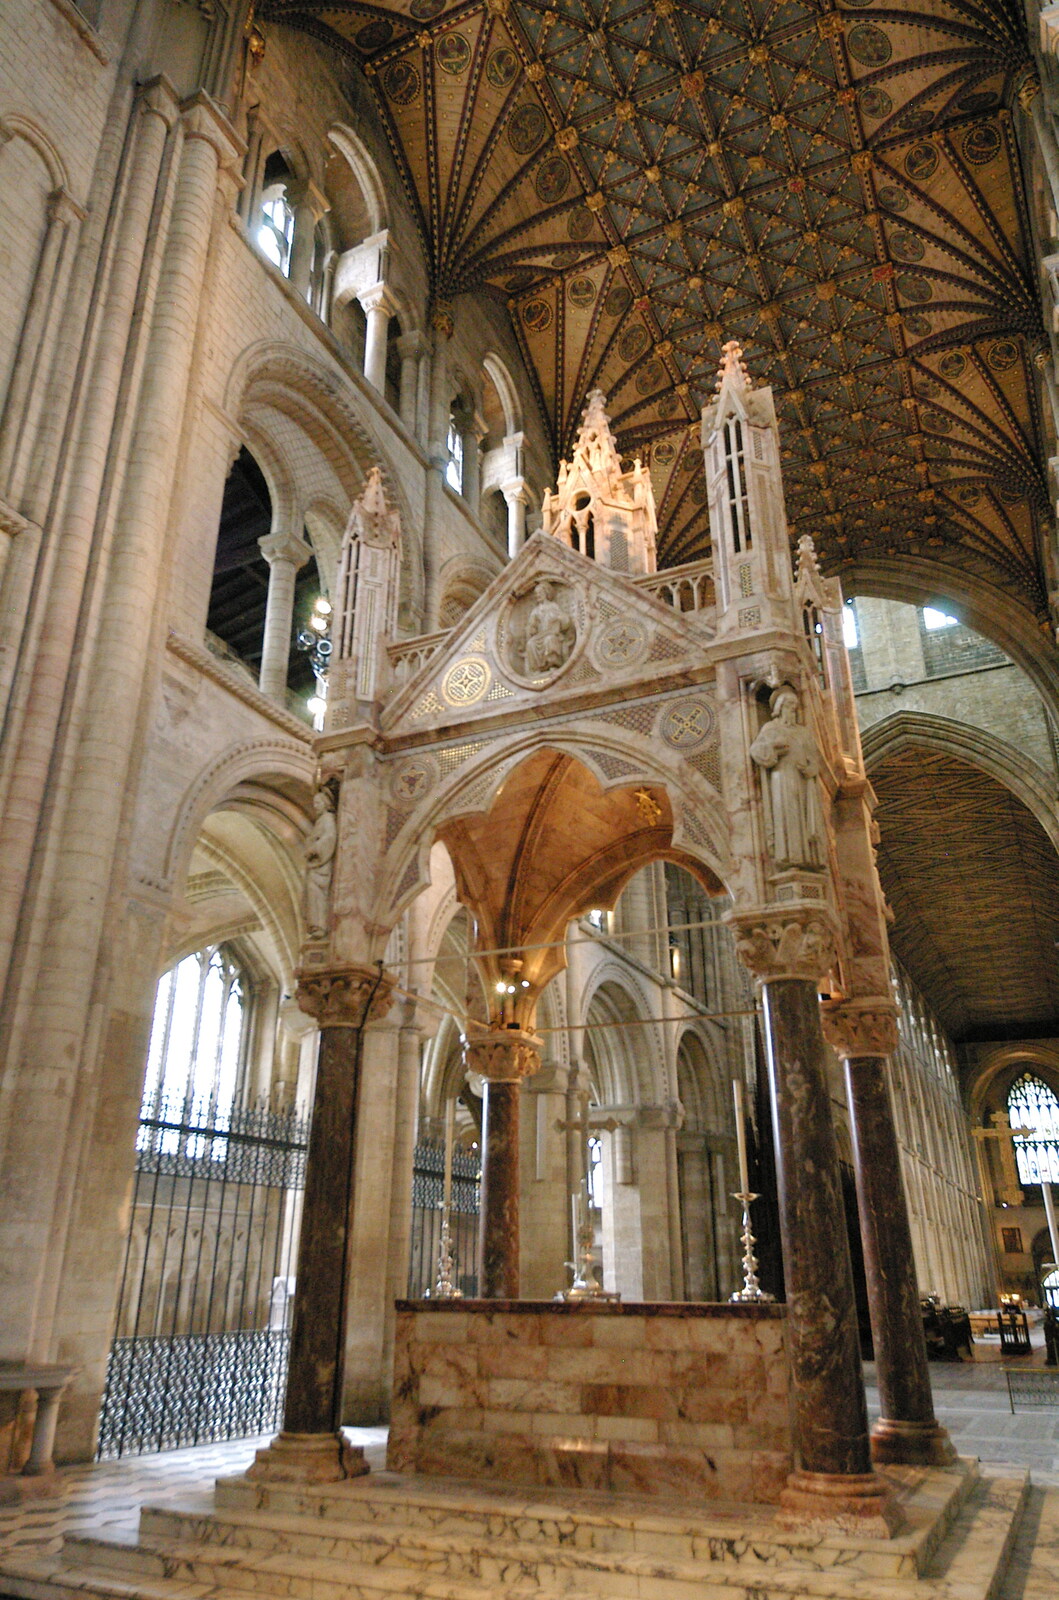 A covered altar from Peterborough Cathedral, Cambridgeshire - 7th September 2005